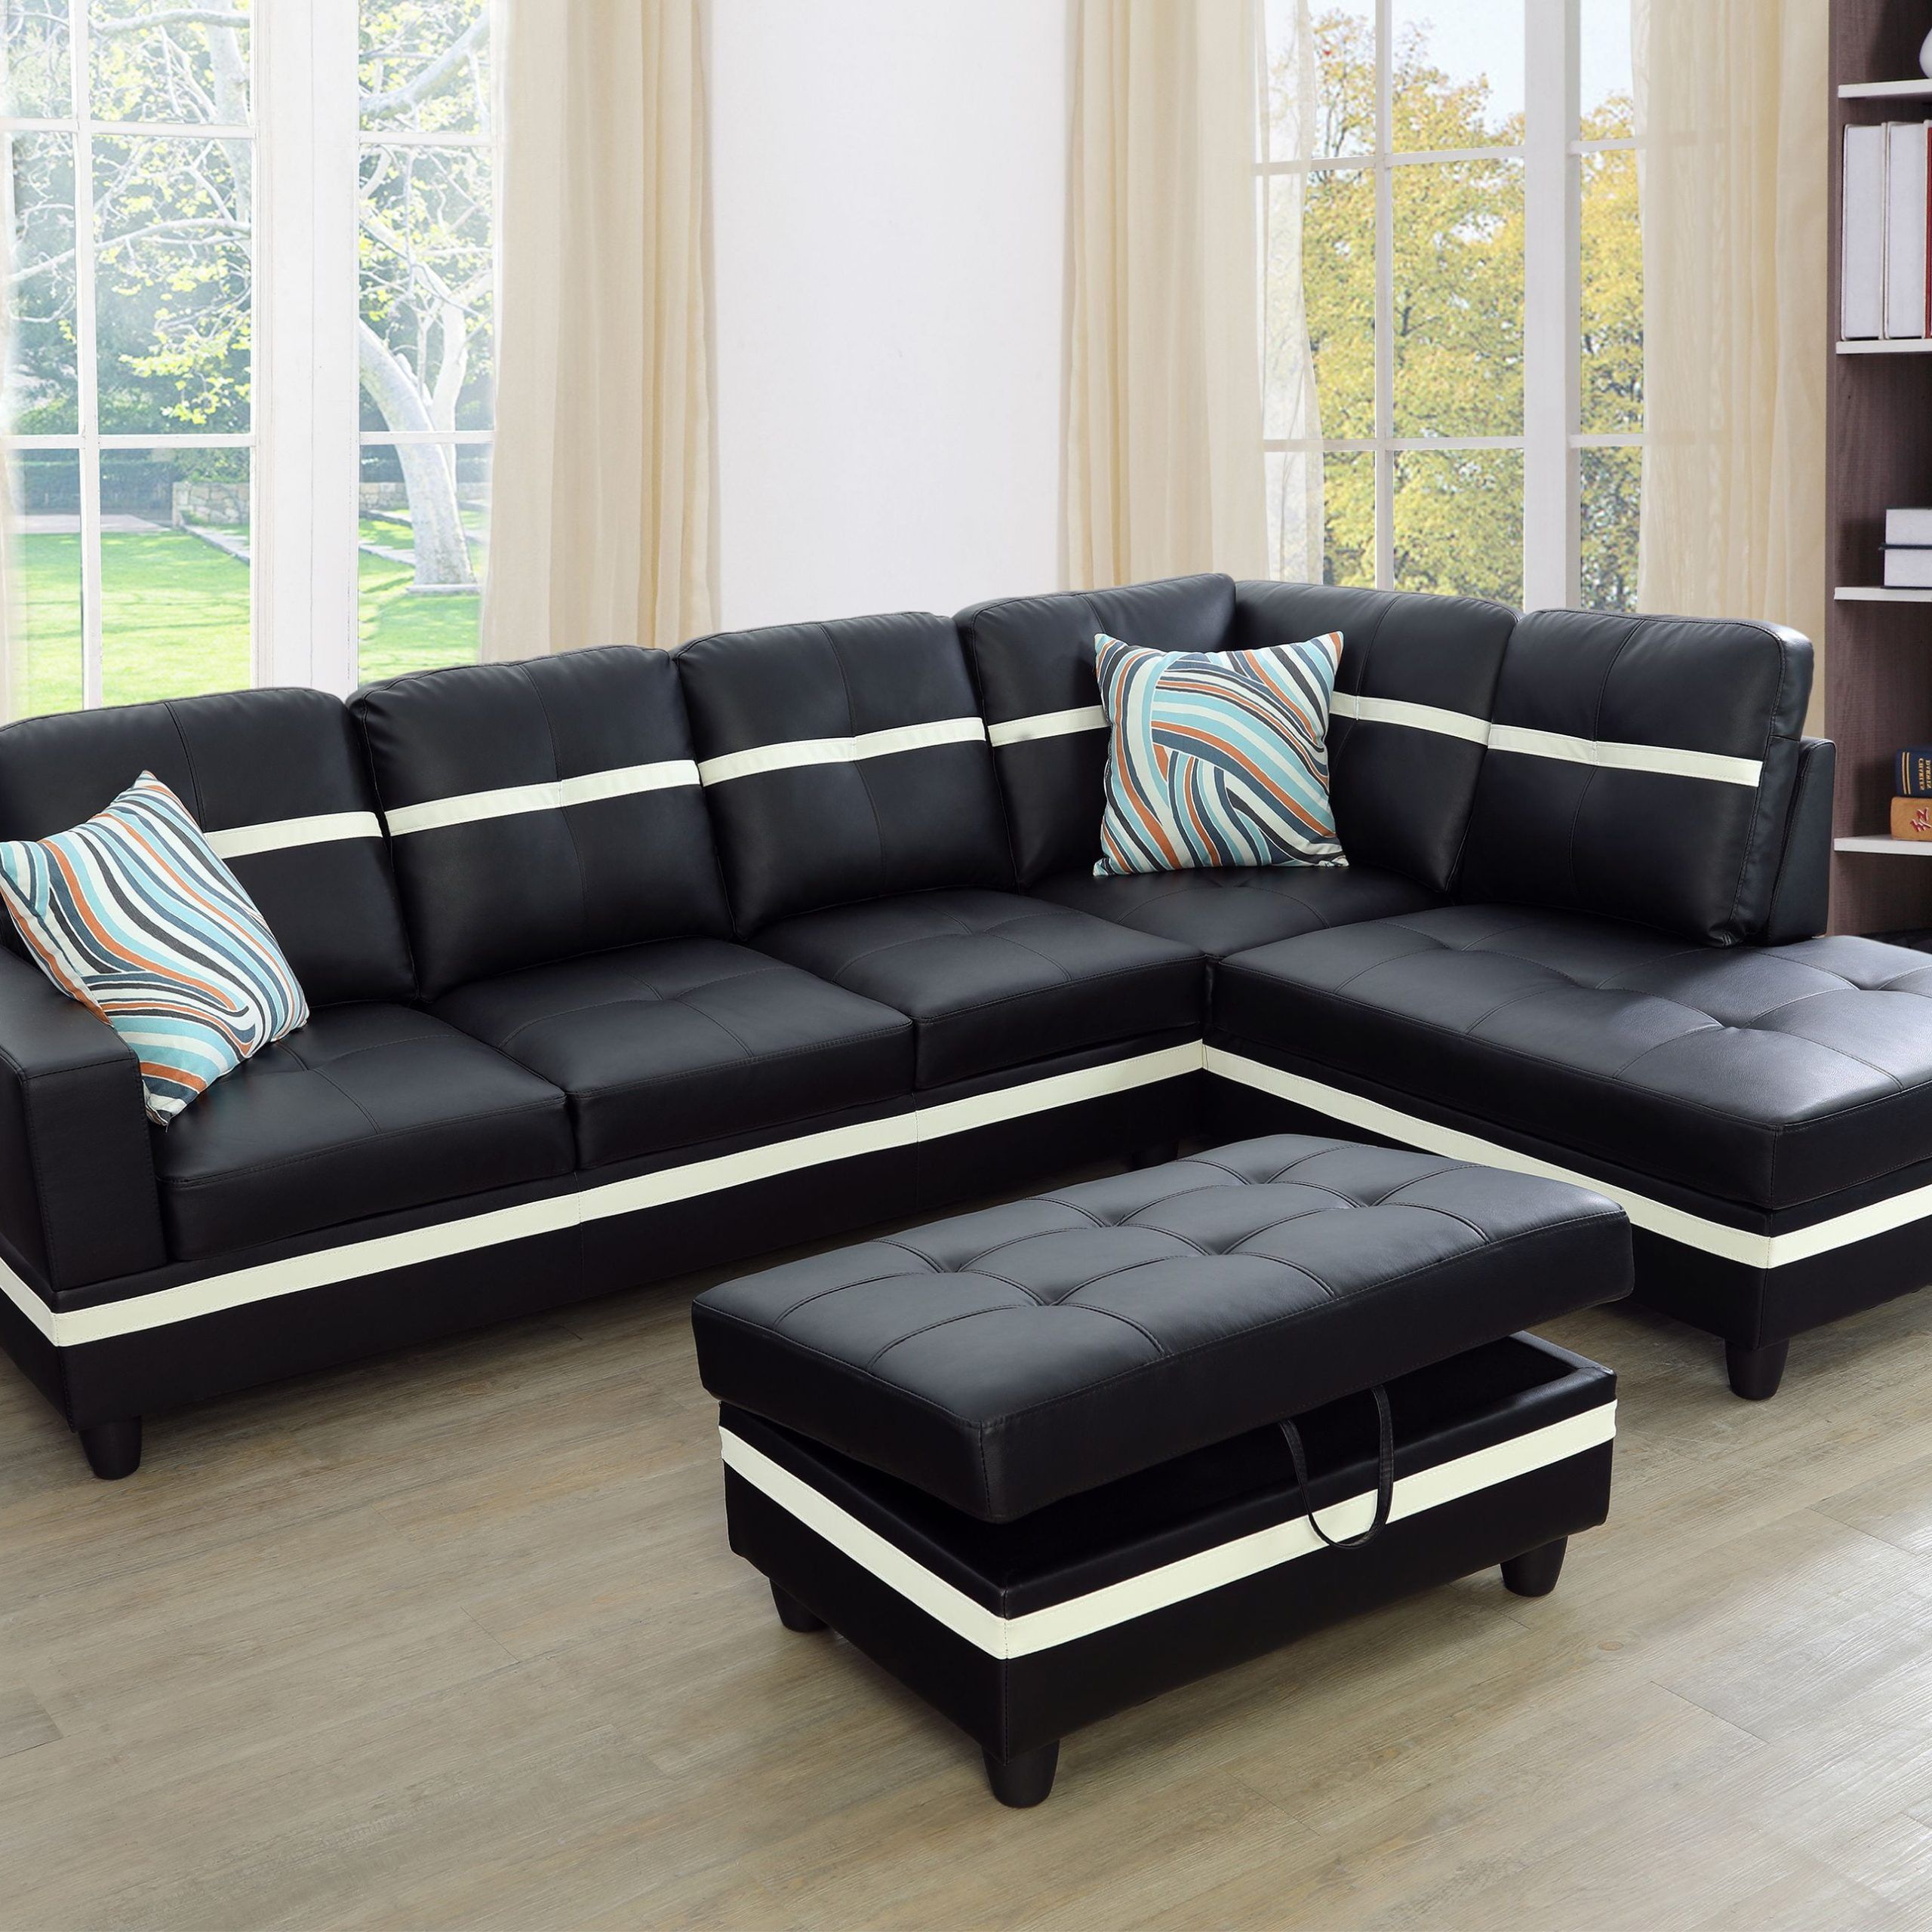 Black And White Modern Sectional Sofa Set – Latest Sofa Pictures With Regard To 3 Seat L Shaped Sofas In Black (View 17 of 20)